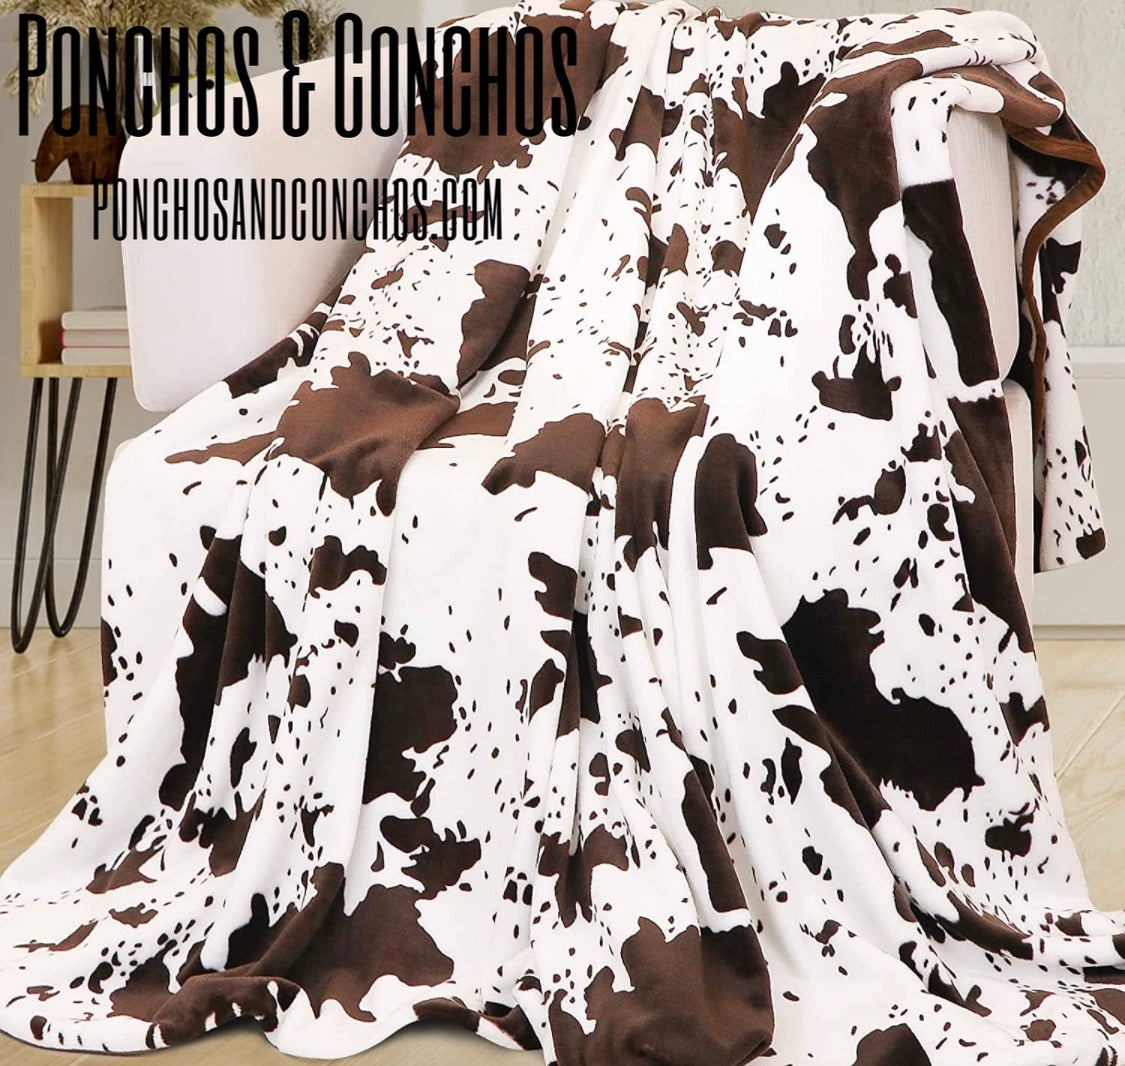 Brown and White Cow Print